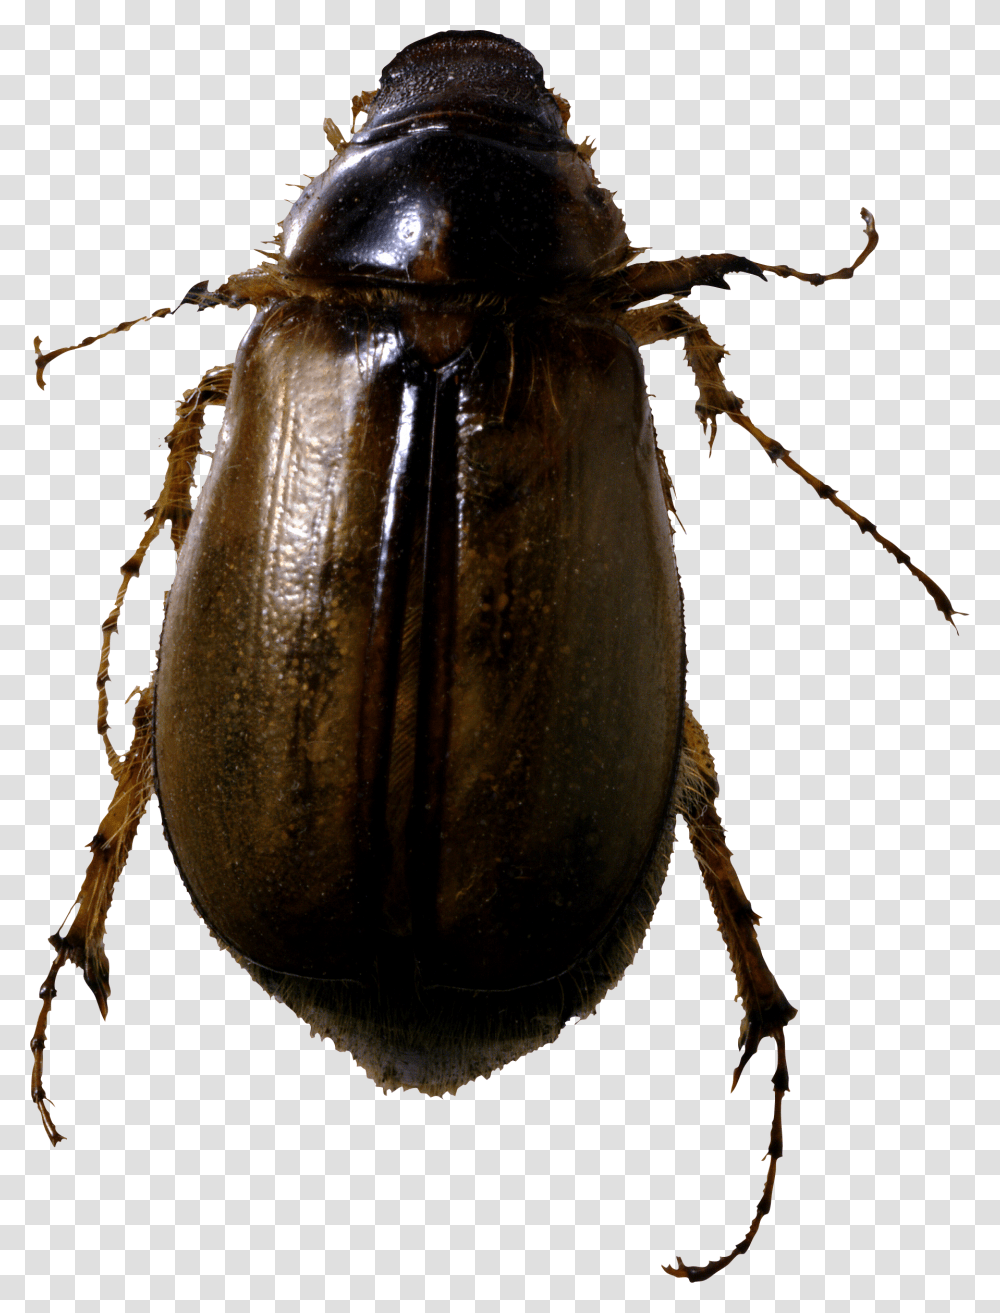 Roach Bug Image Bug, Insect, Invertebrate, Animal, Dung Beetle Transparent Png